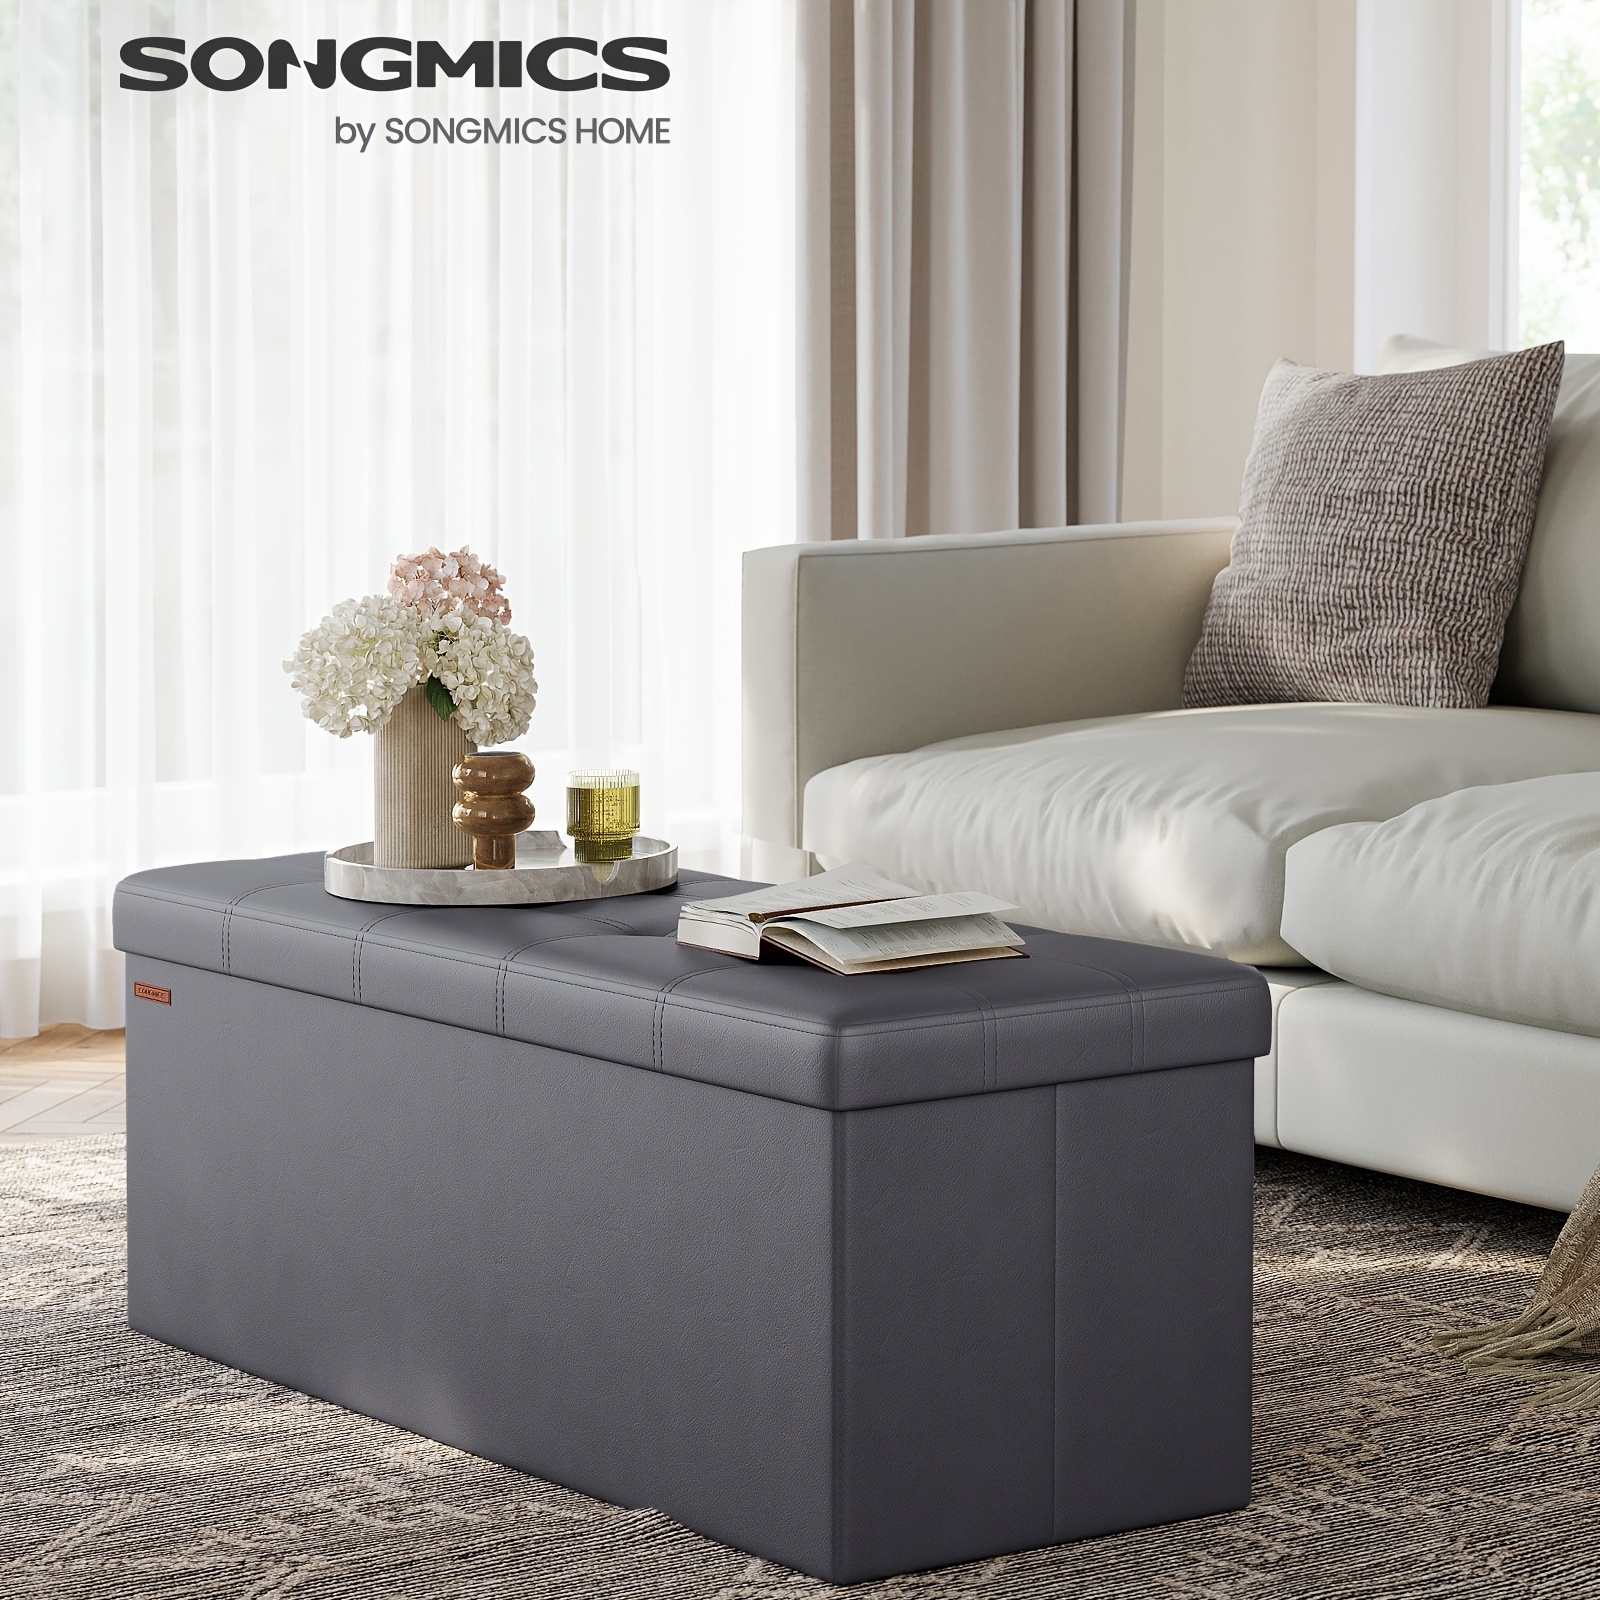 

Songmics 43 Inches Folding Storage Ottoman Bench, Storage Chest, Footrest, Coffee Table, Padded Seat, Faux Leather, Holds Up To 660 Lb